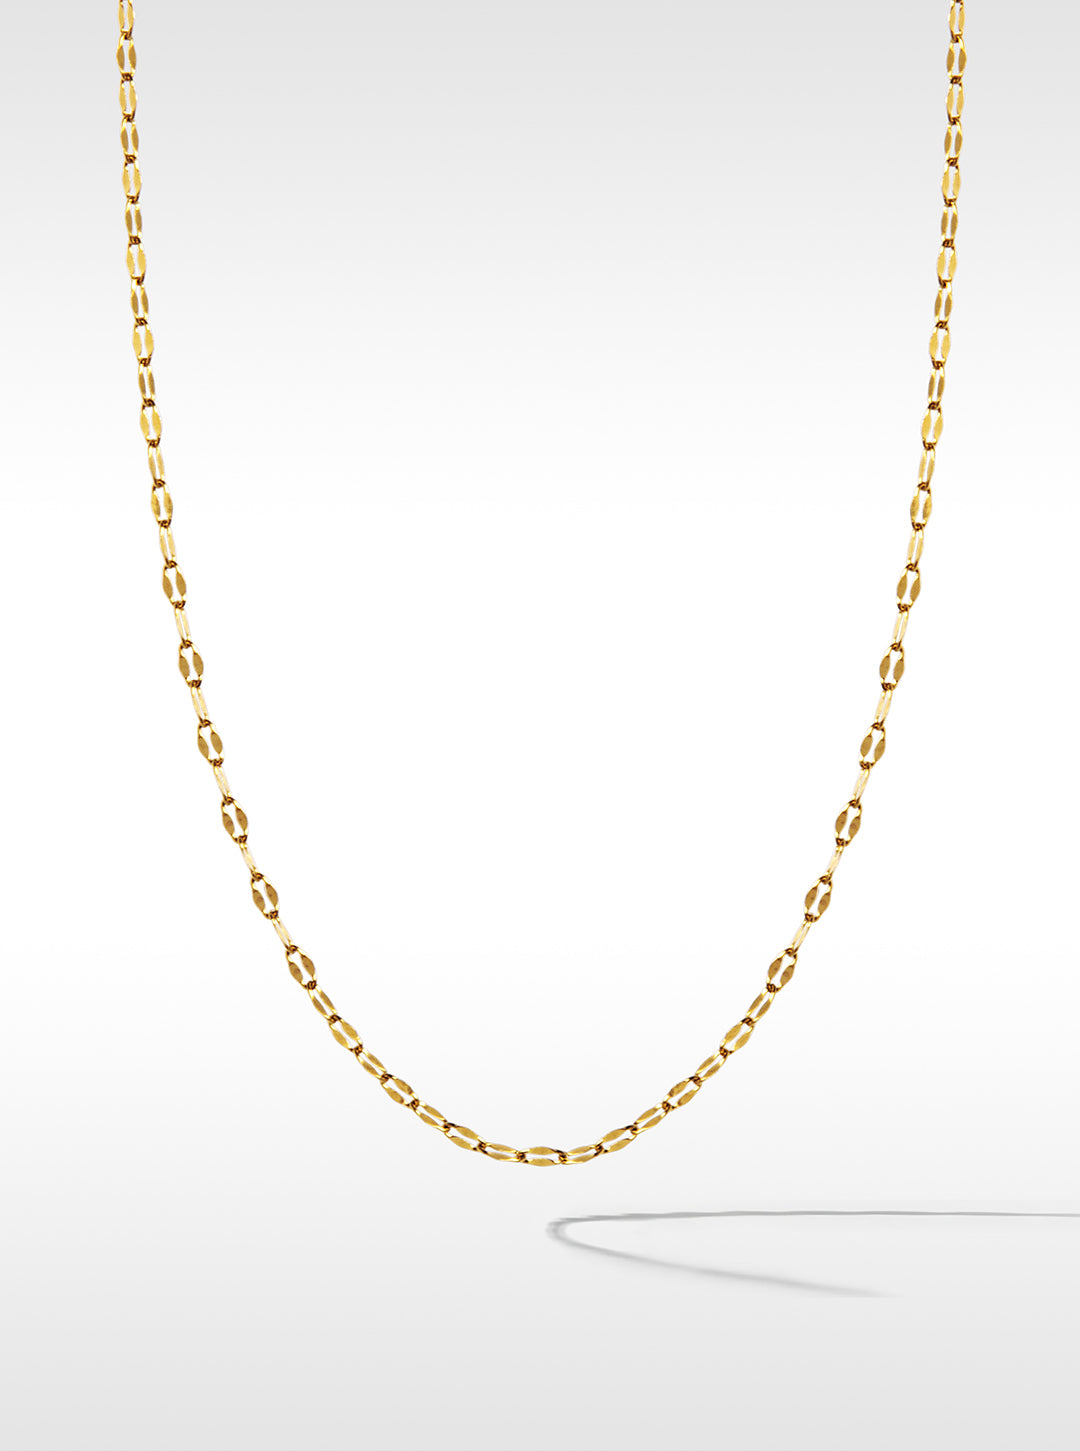 minimalist necklace for women in dainty style and gold tone